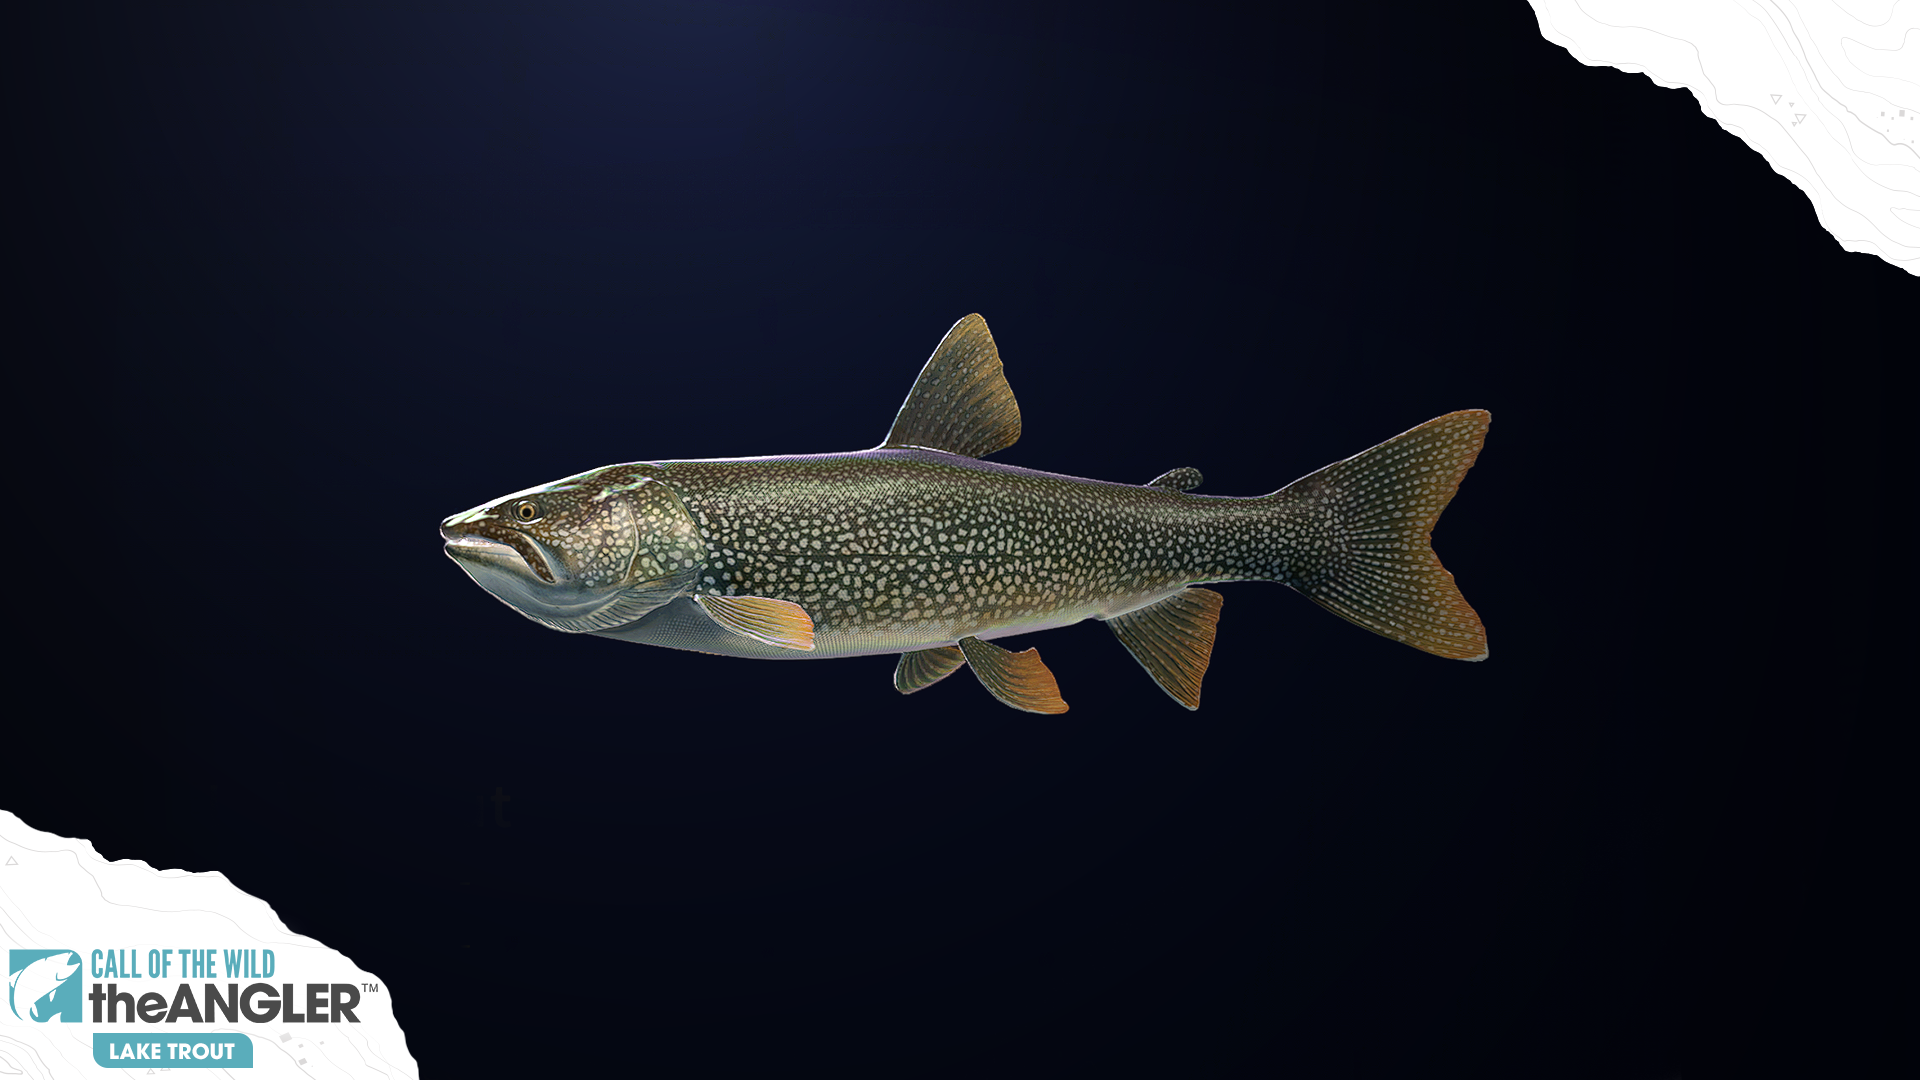 An image of the fish species, Lake Trout.